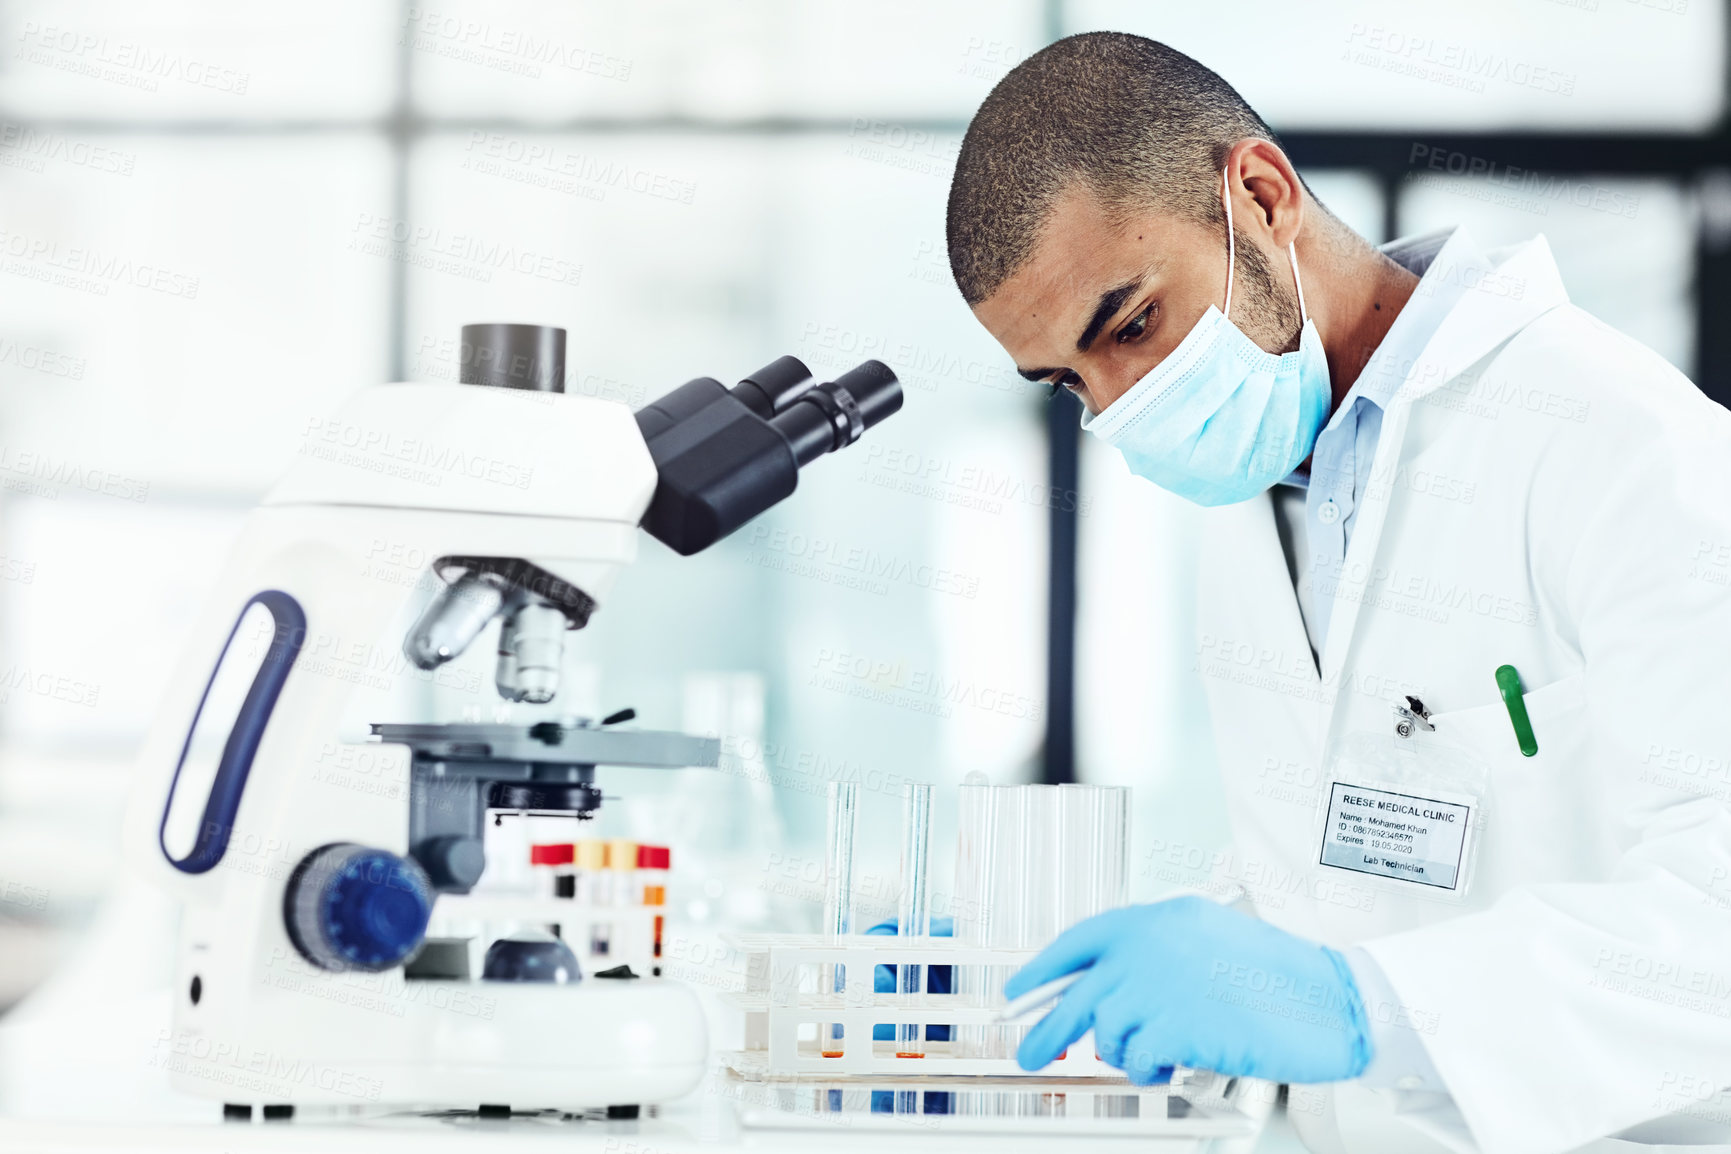 Buy stock photo Cropped shot of a young male scientist working in his lab